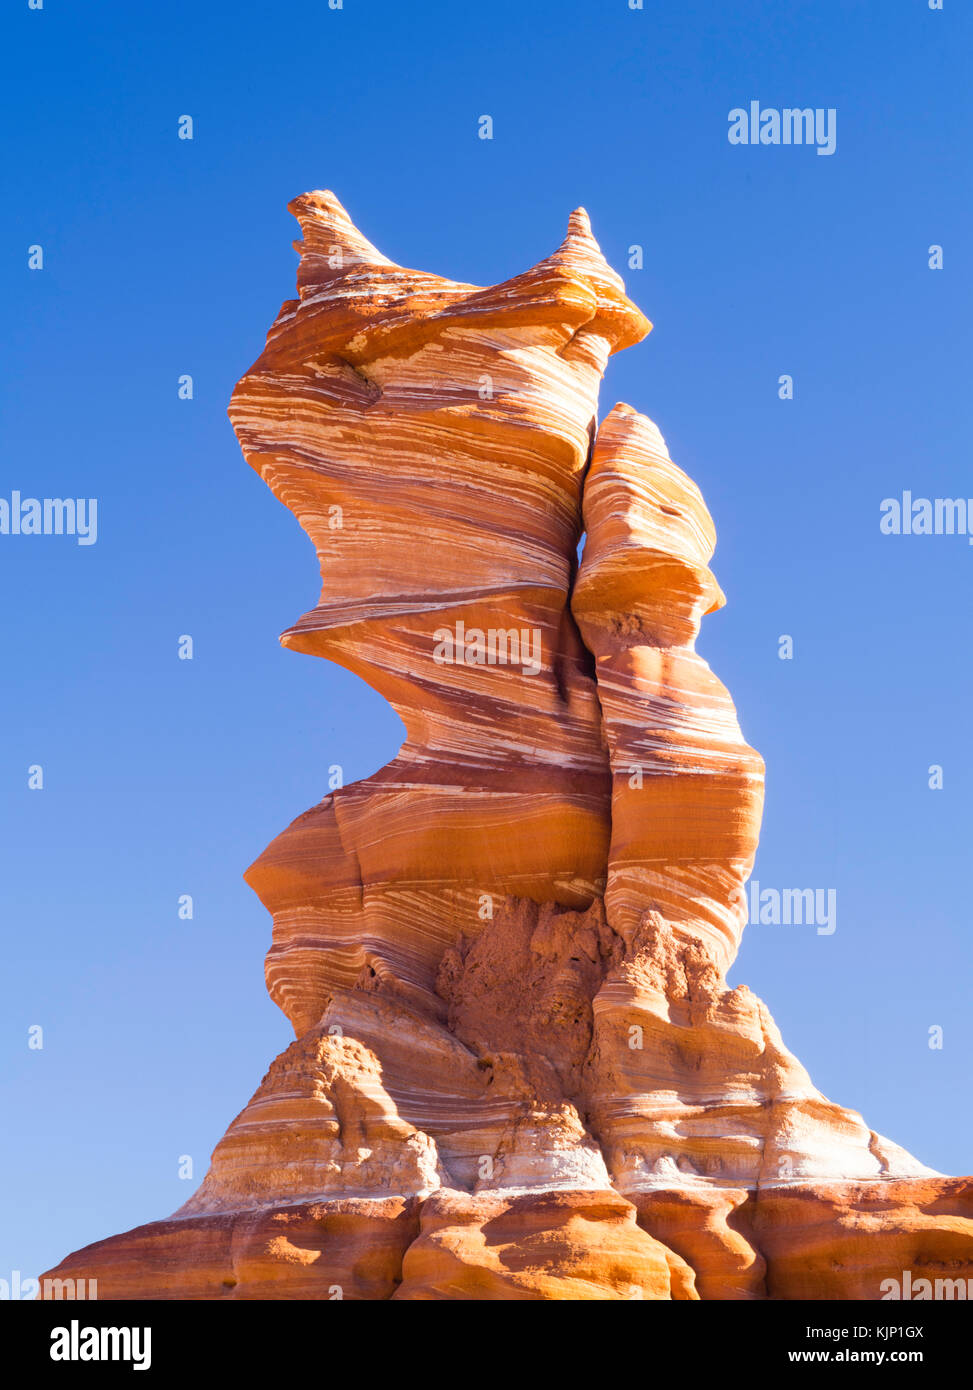 Morning view of the Hopi Clown, a Moenave Sandstone formation in the Adeii Echii Cliffs of Coconino County, Arizona. Stock Photo